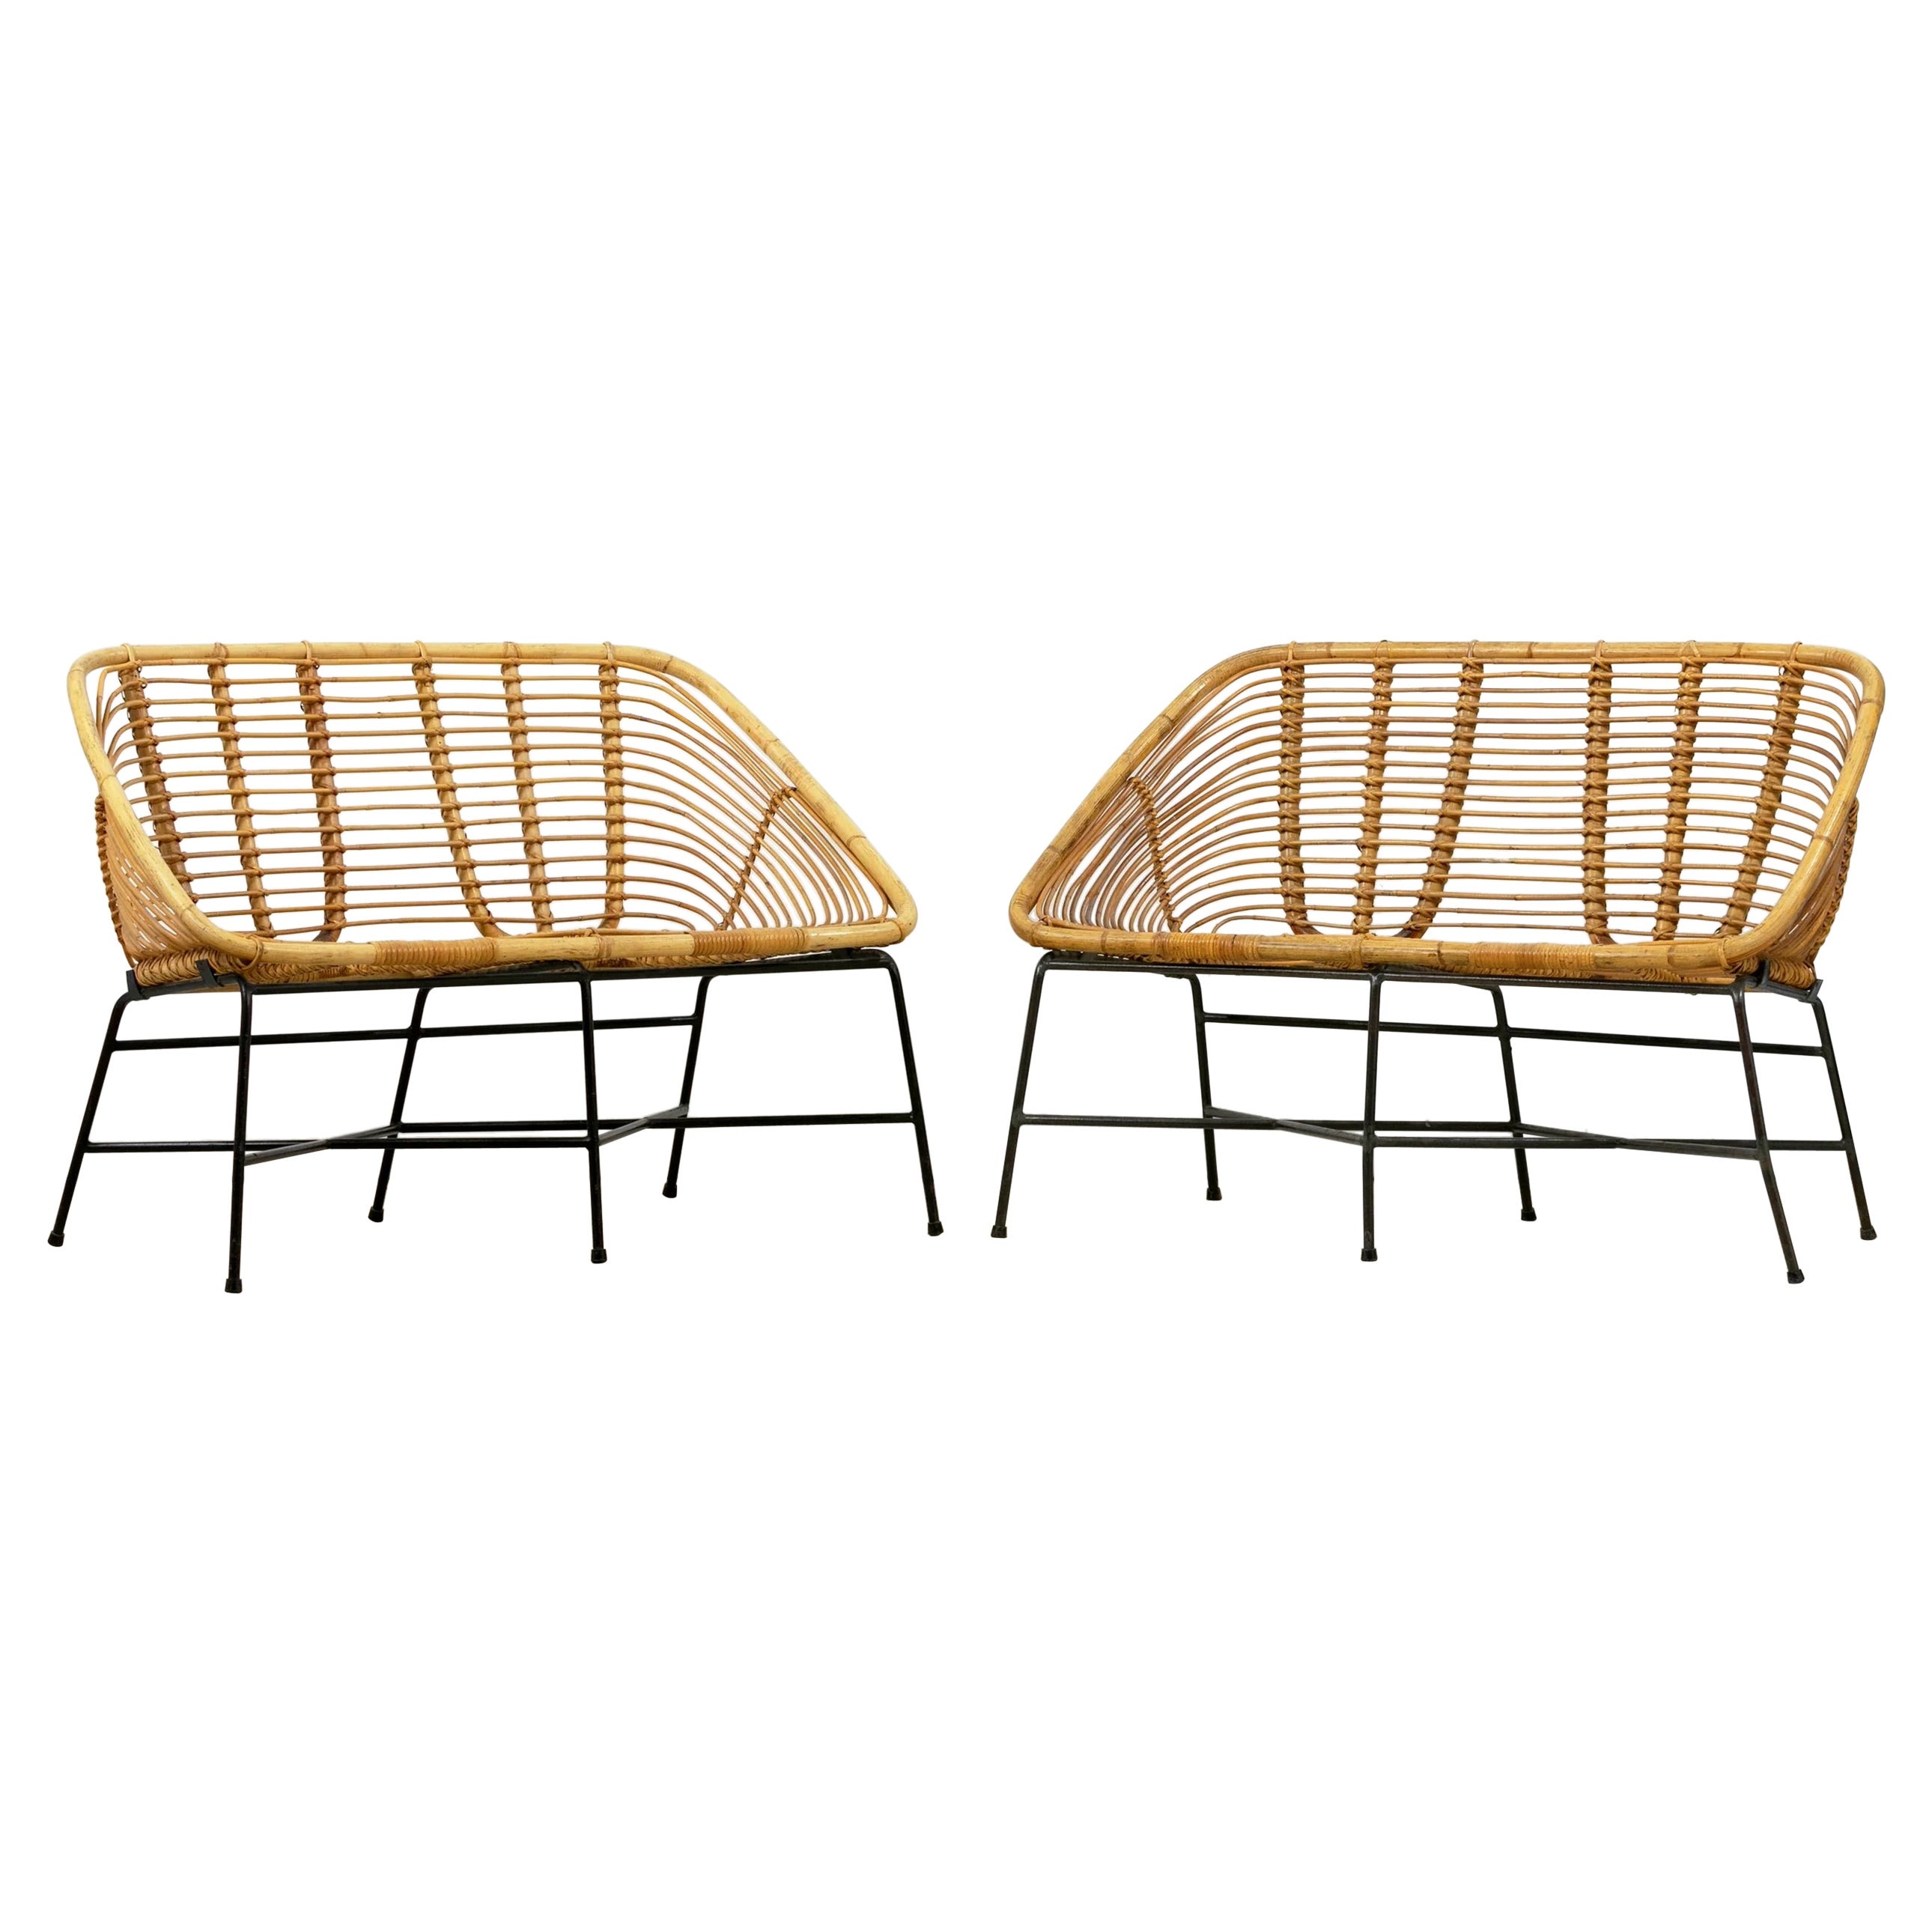 Pair of rattan and lacquered iron bench seats, France, circa 1950 For Sale